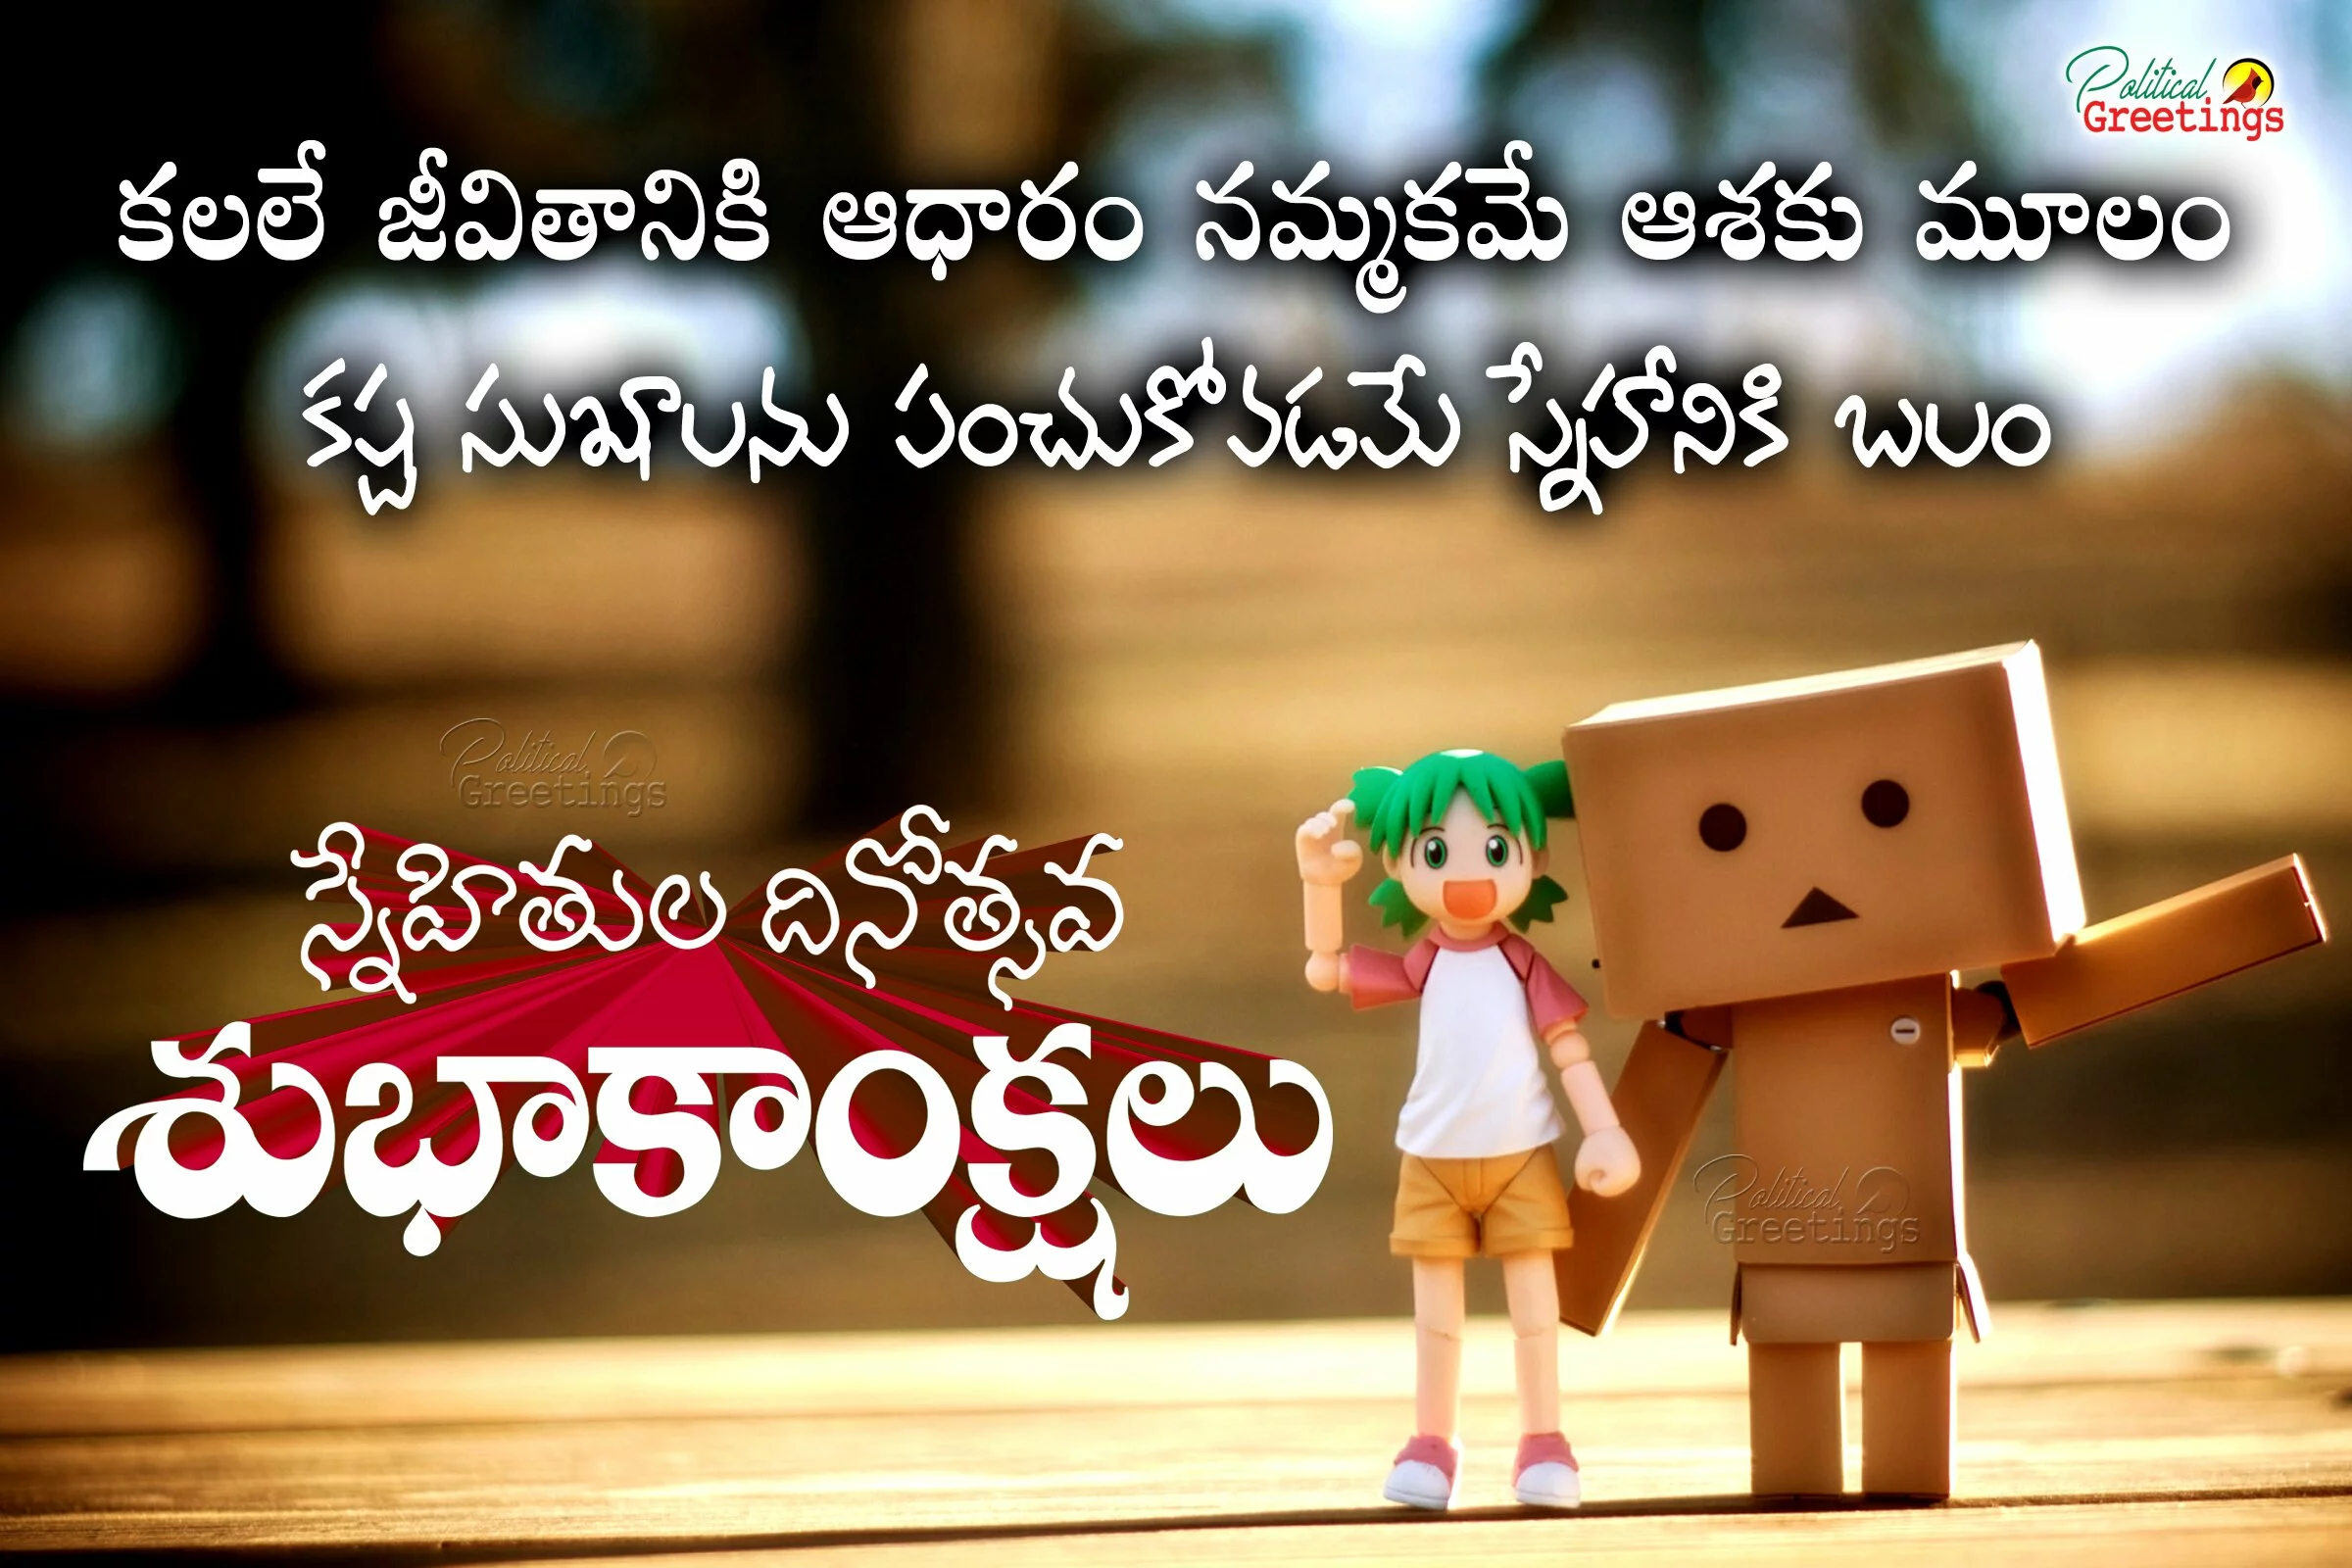 Happy Friendship day in telugu & english Quotes, Images, Messages for Facebook